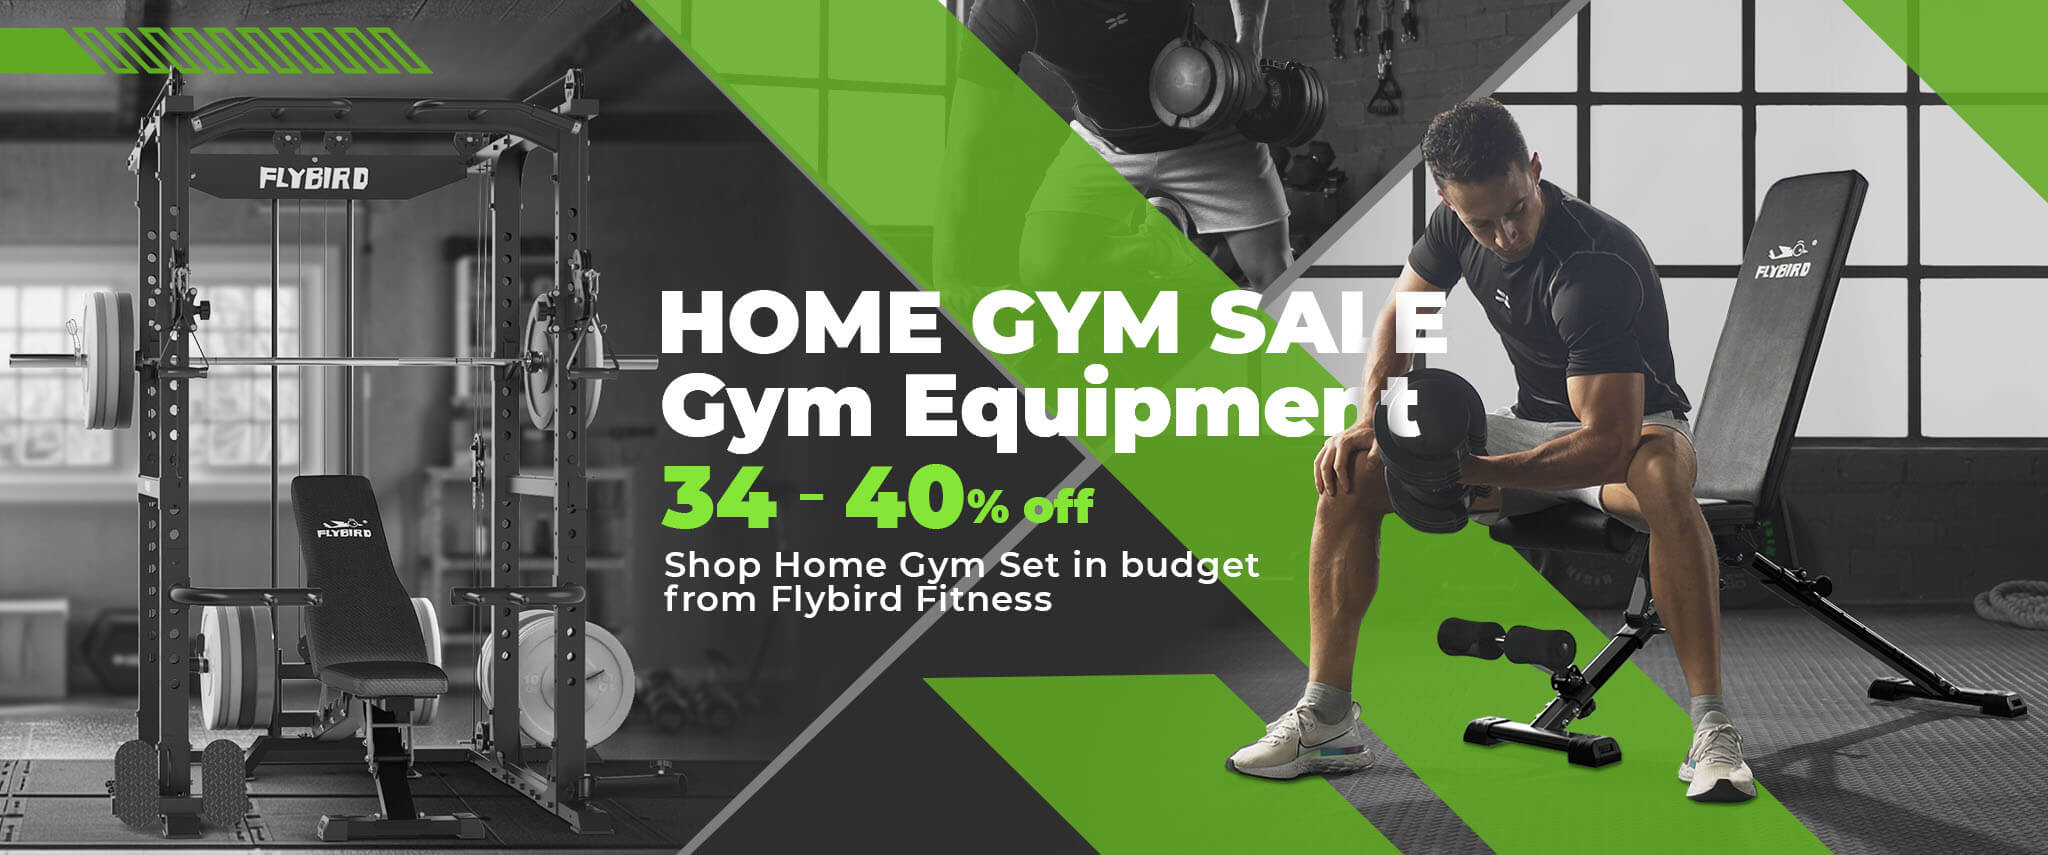 flybird weight bench sale, home Gym Equipment for sale